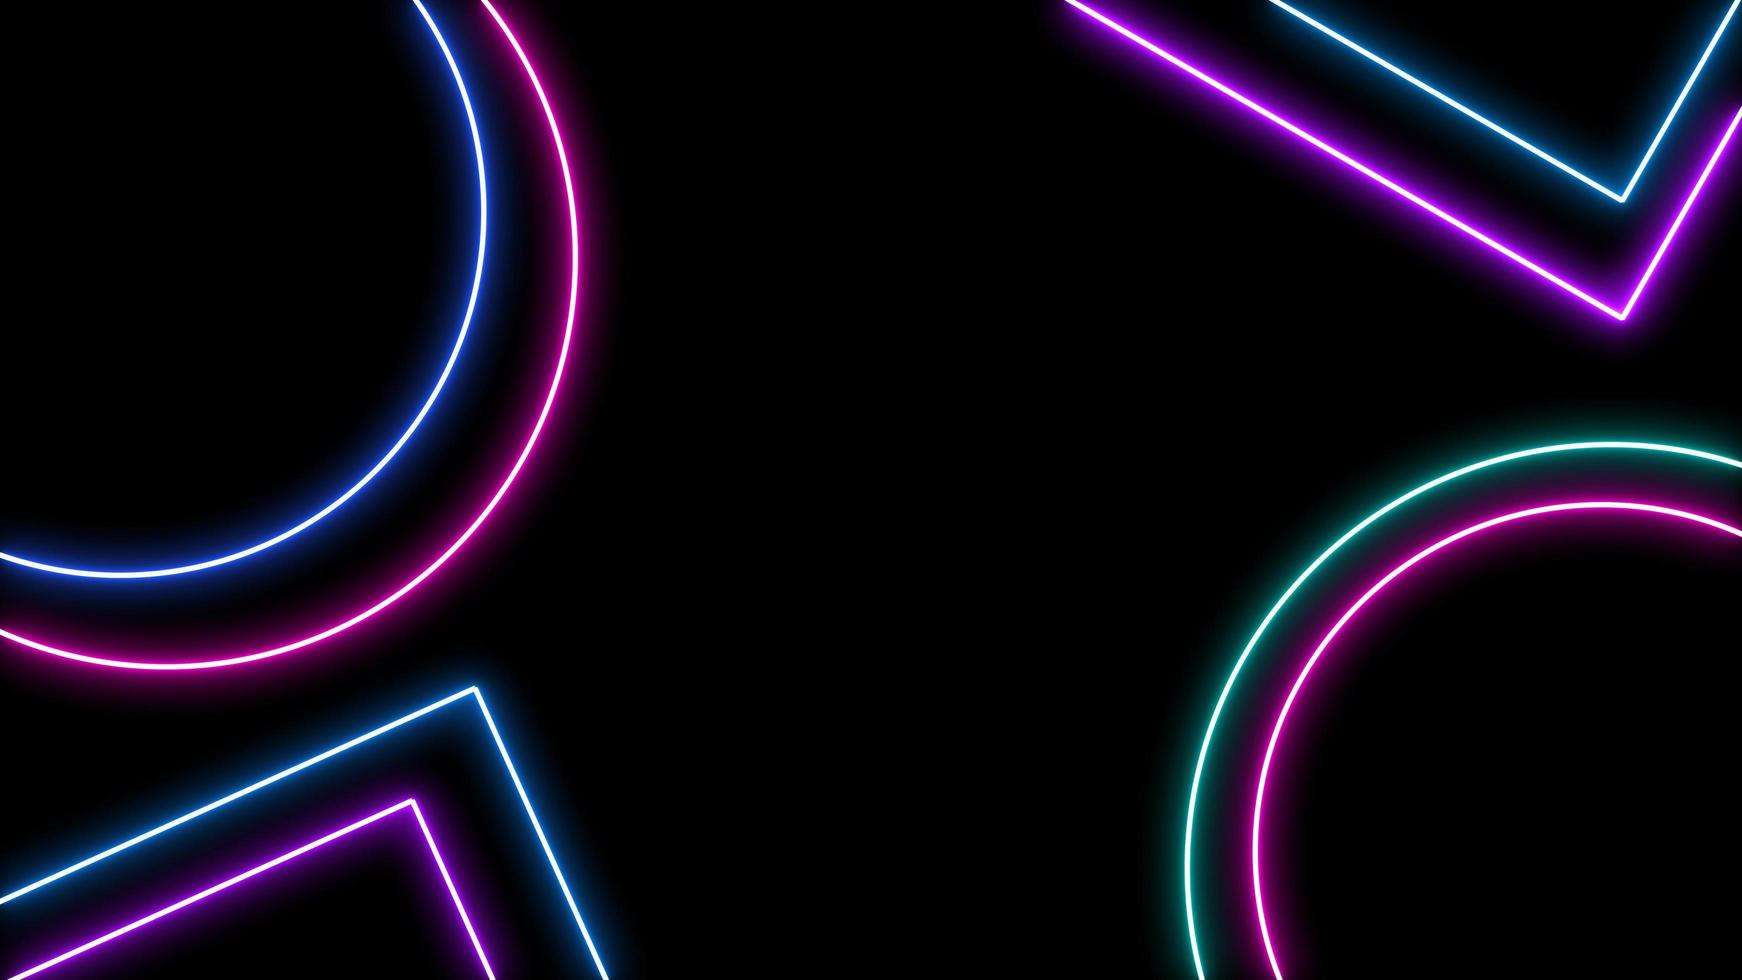 Abstract Retro Sci-Fi Neon bright lens flare colored on black background. Laser show colorful design for banners advertising technologies. Retro style of the 80s photo